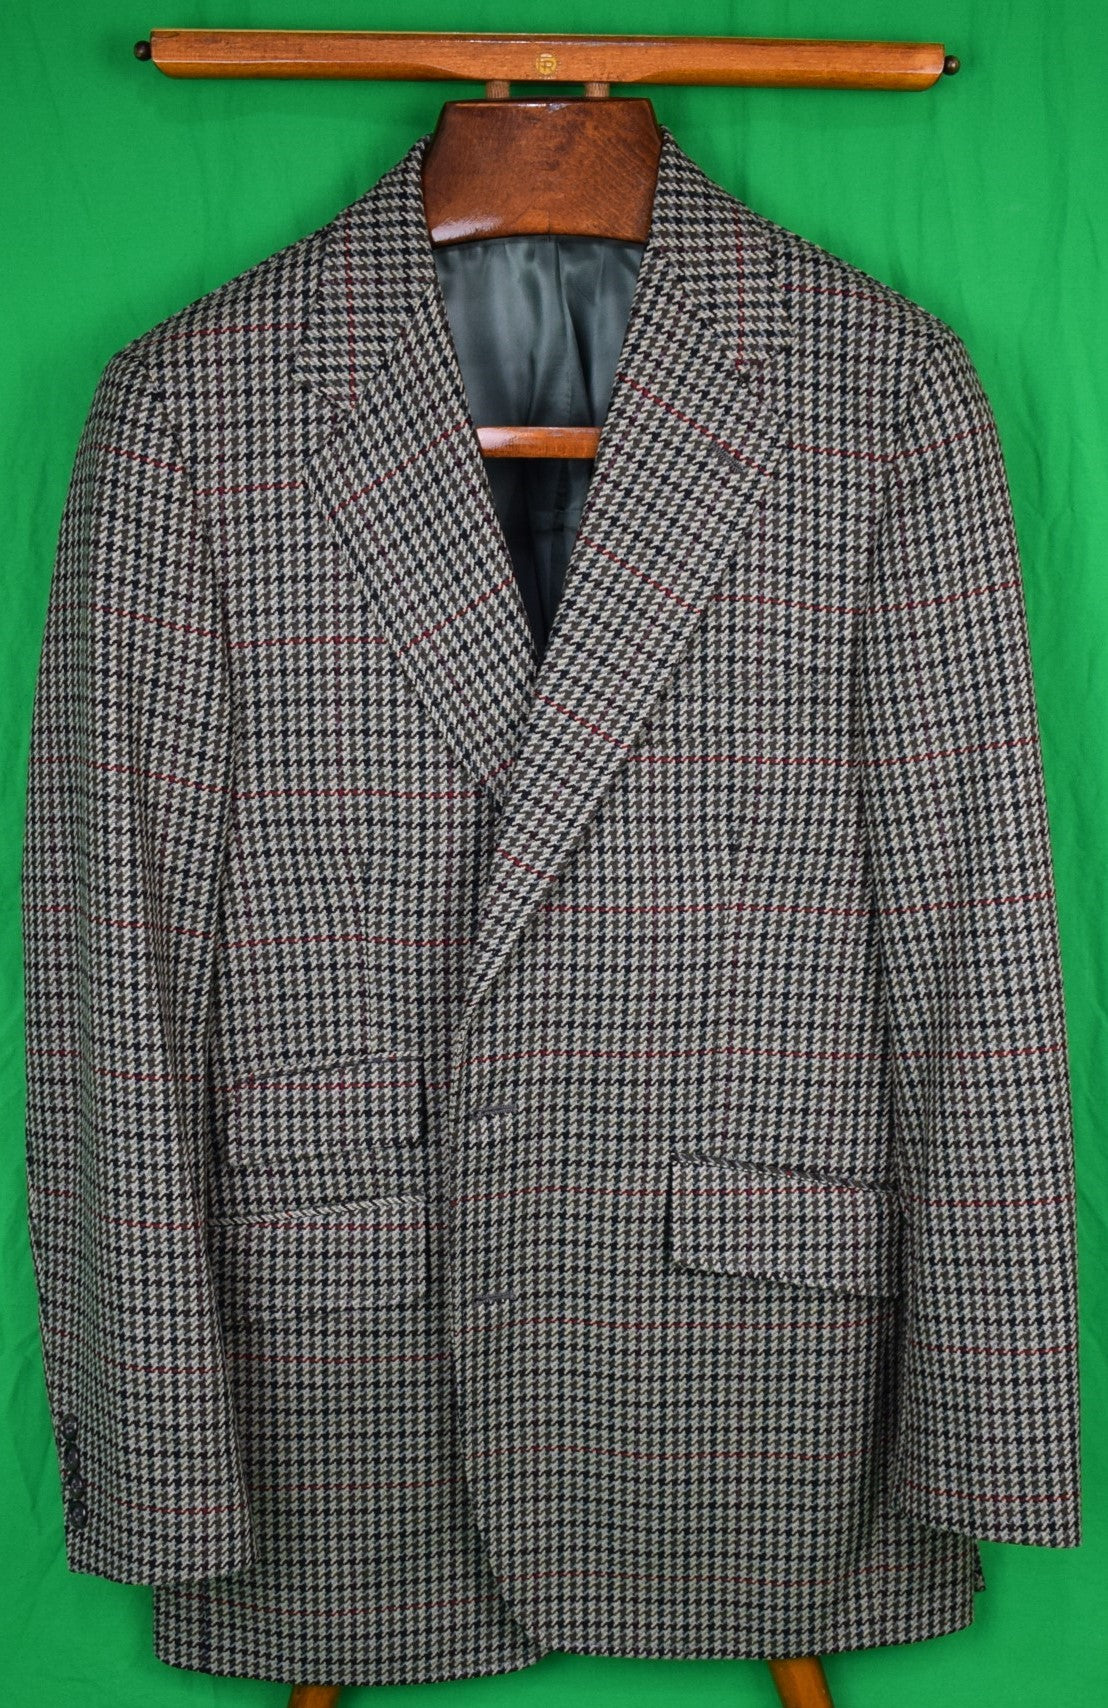 Vtg Polo Ralph Lauren Glen Plaid Wool Tweed Leather Elbow Patched